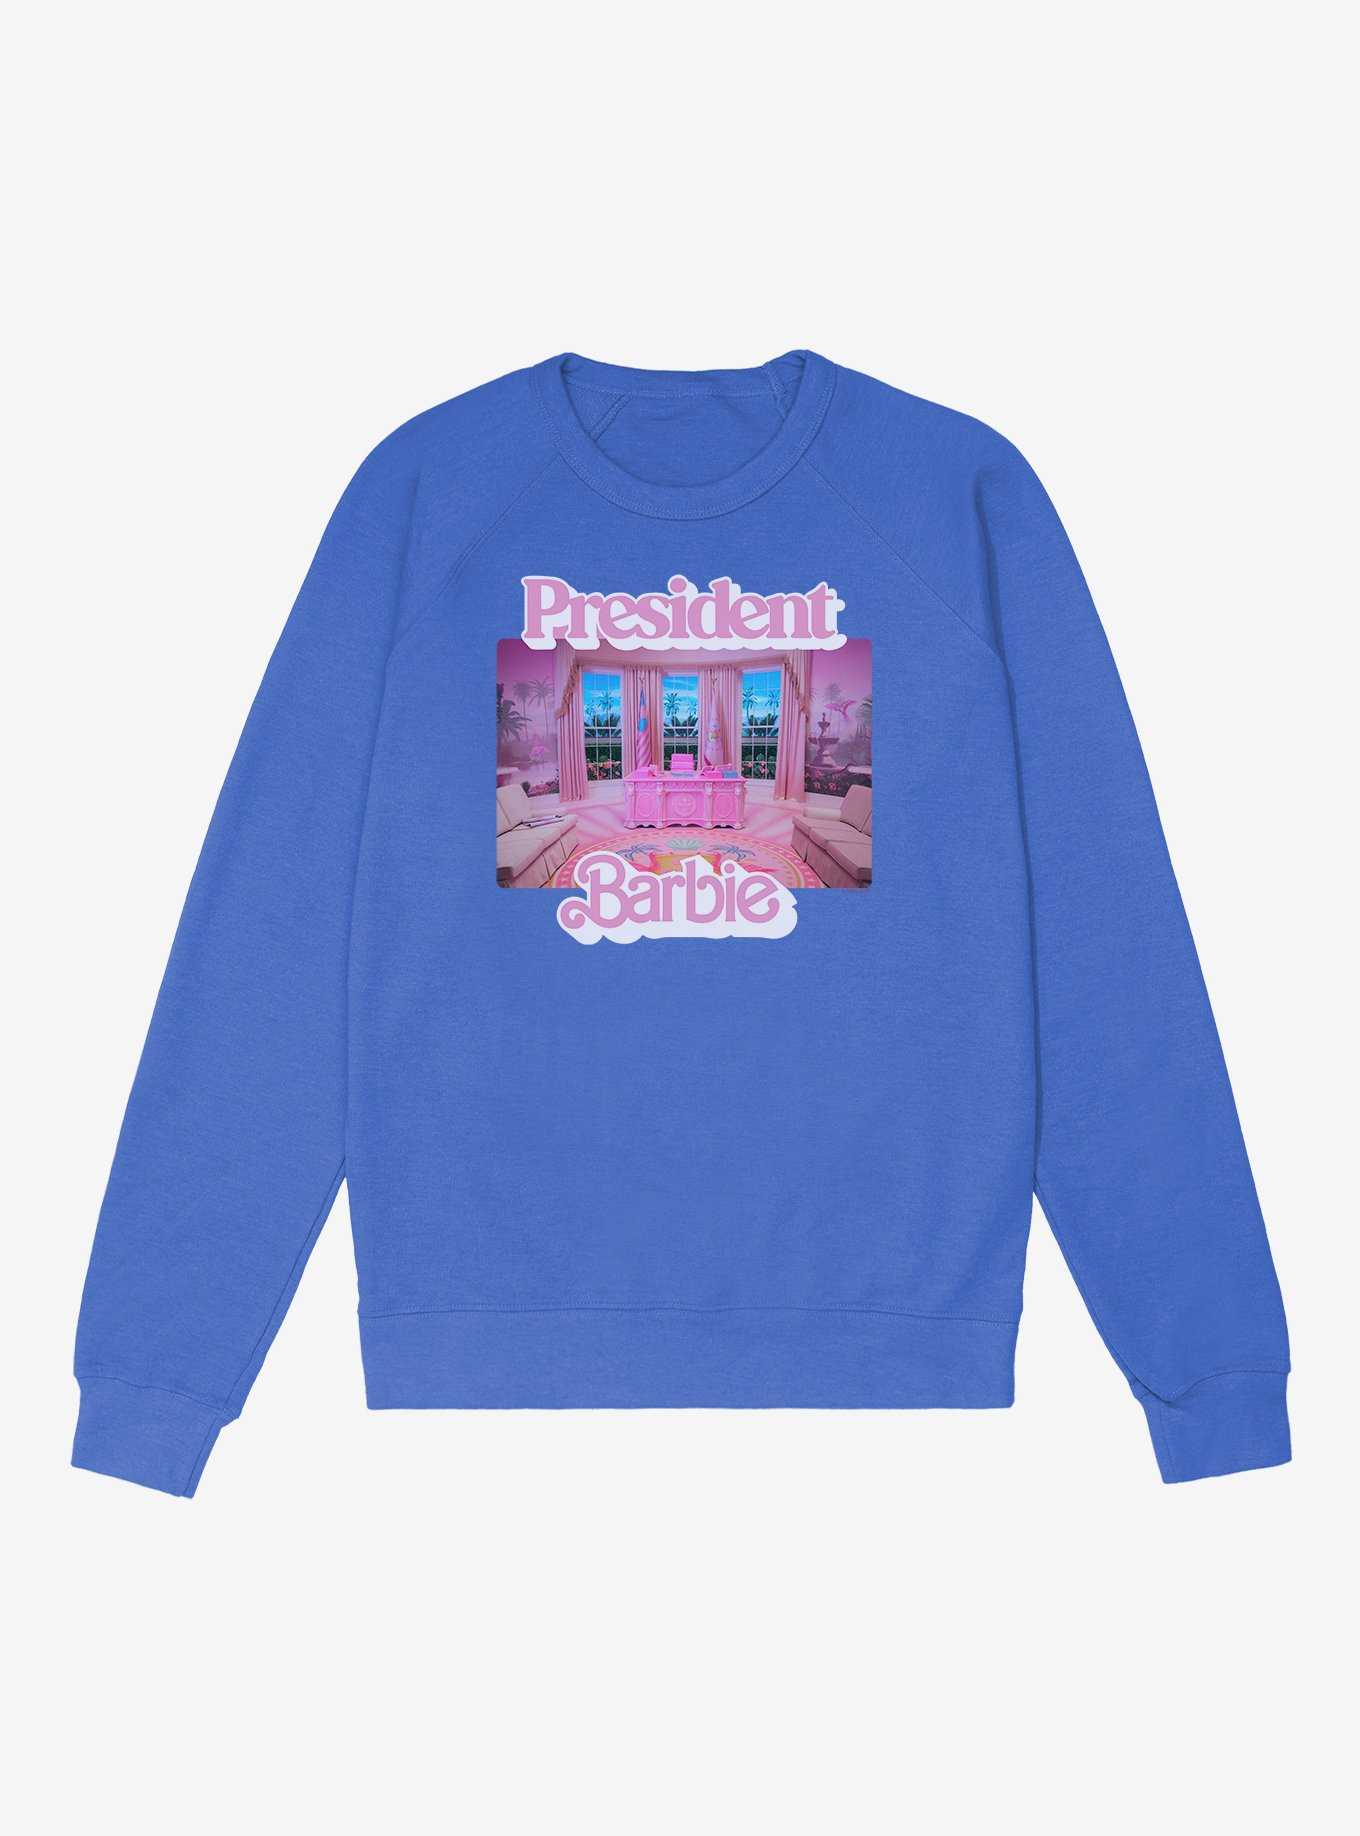 Barbie Movie President Barbie Pink Oval Office French Terry Sweatshirt, , hi-res